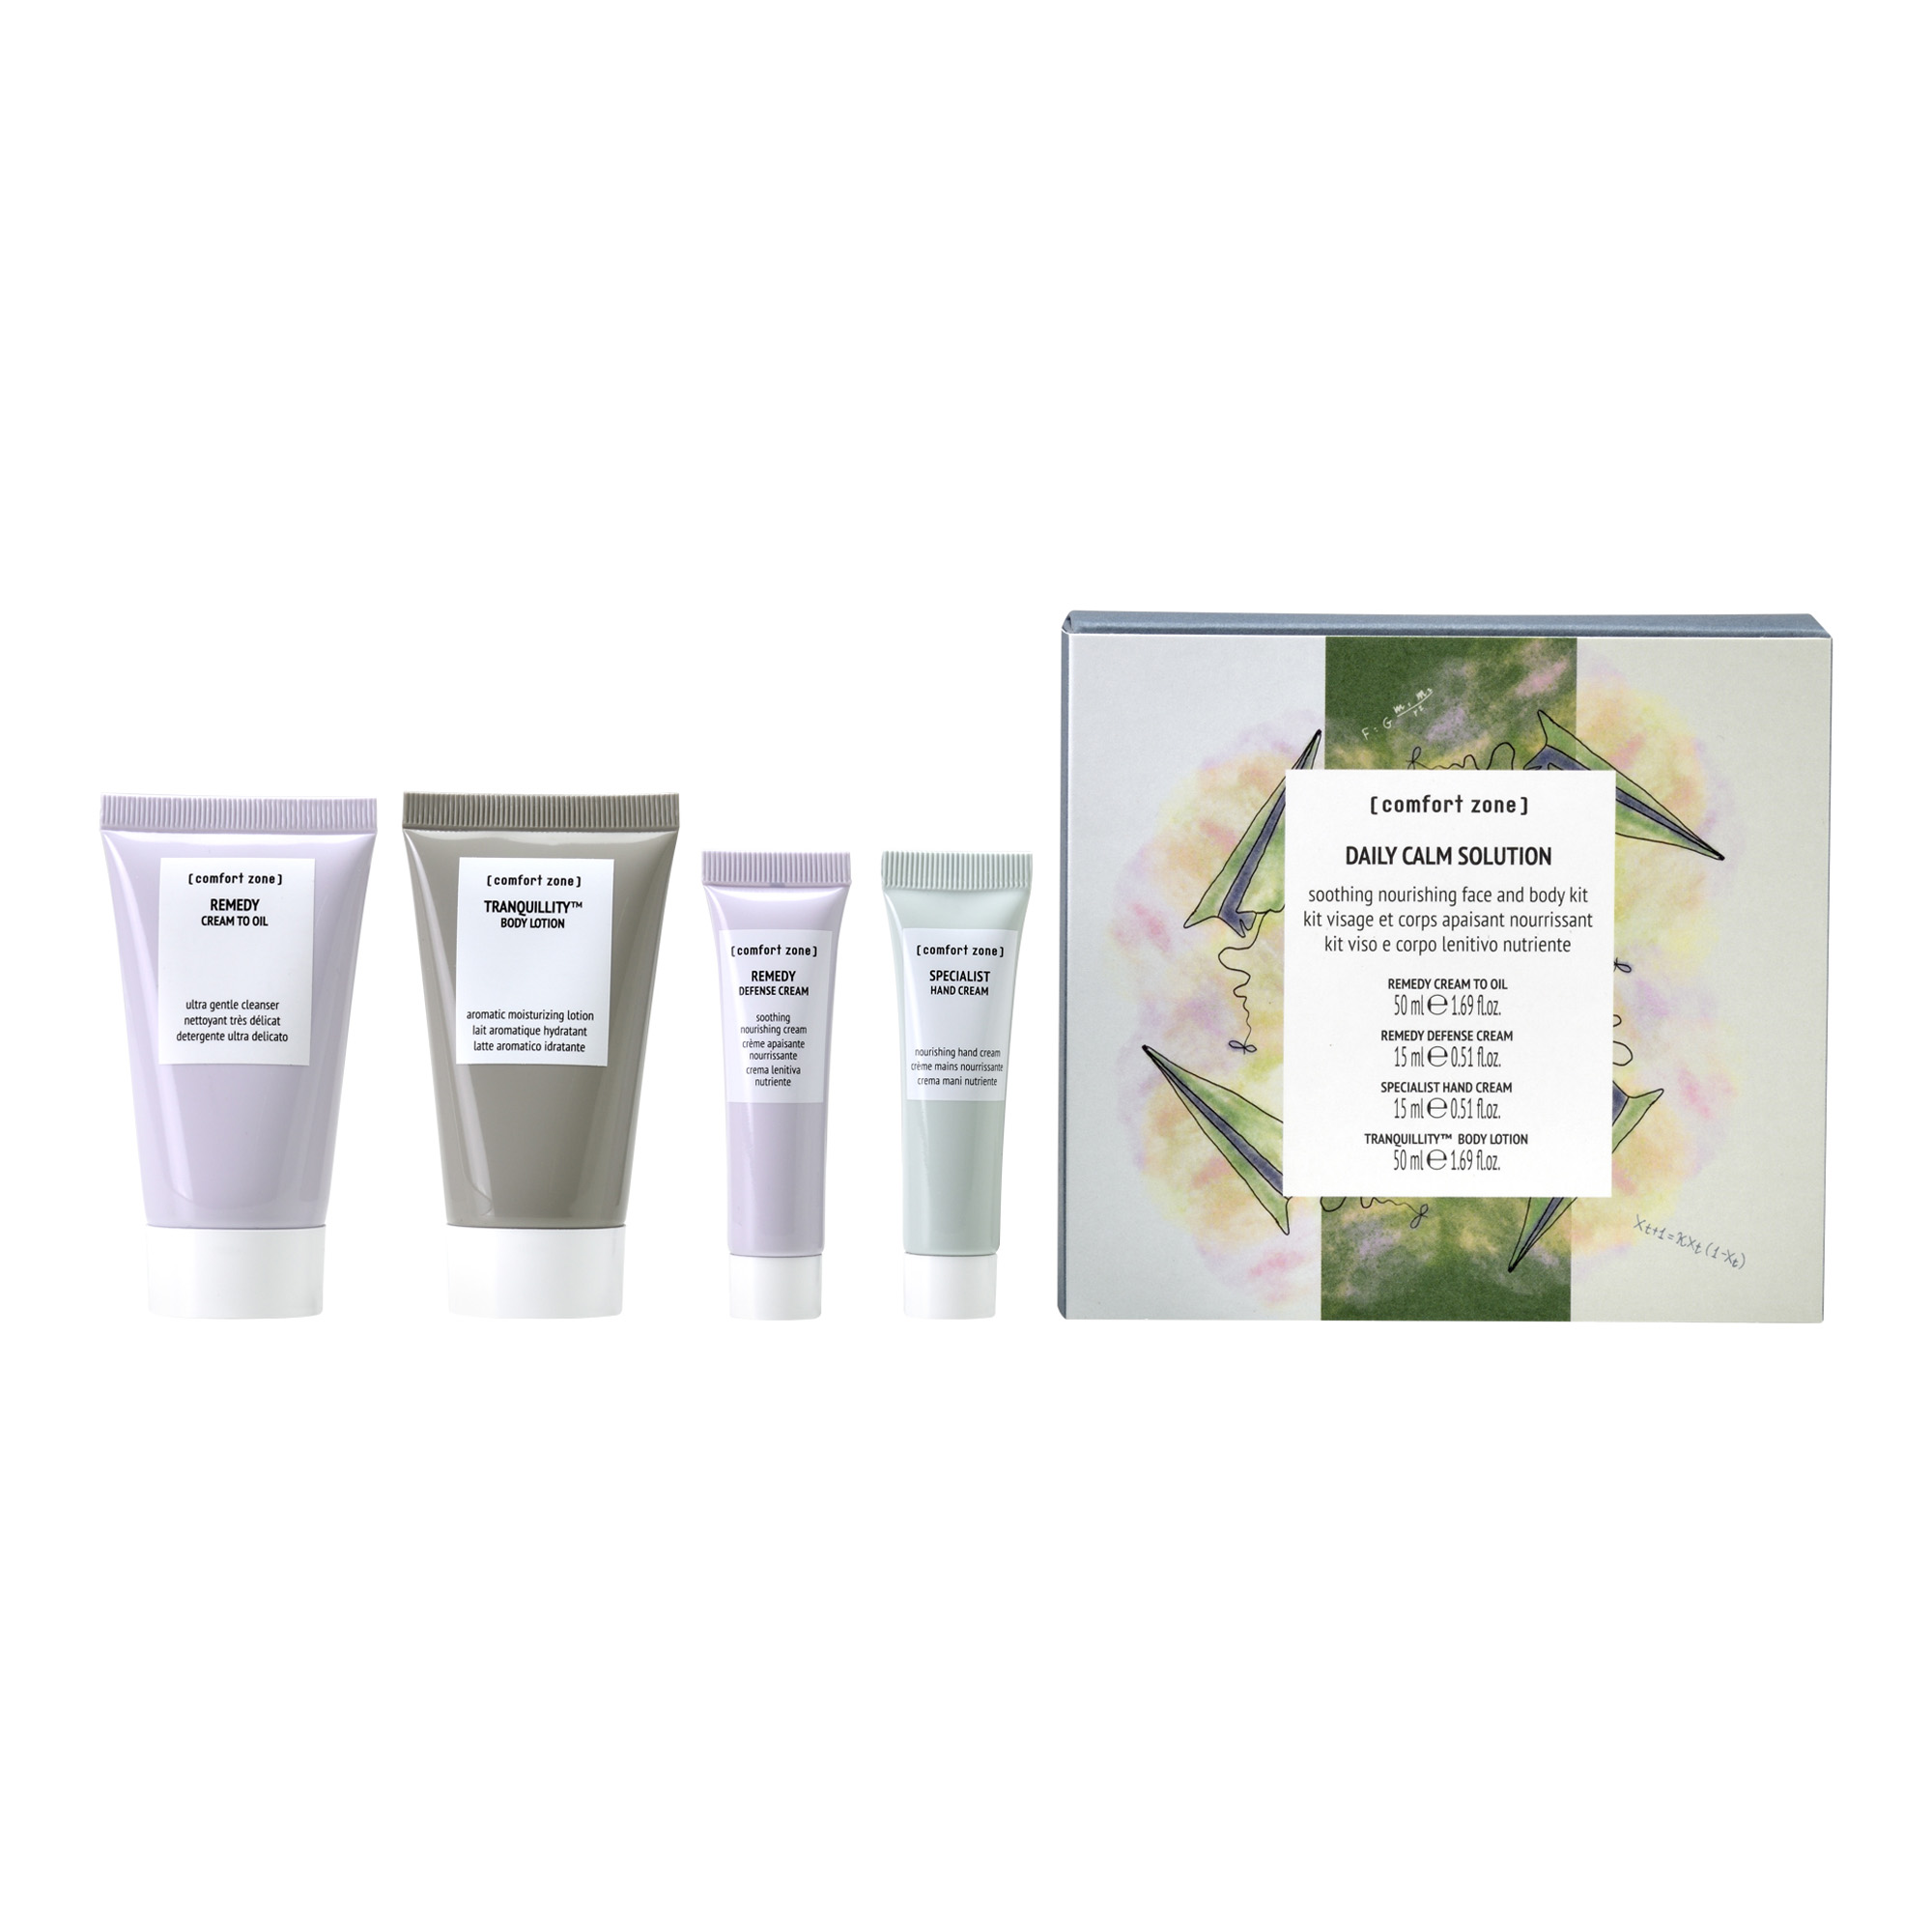 Comfort Zone Daily Calm Solution Kit Soothing Nourishing Face and Body Kit